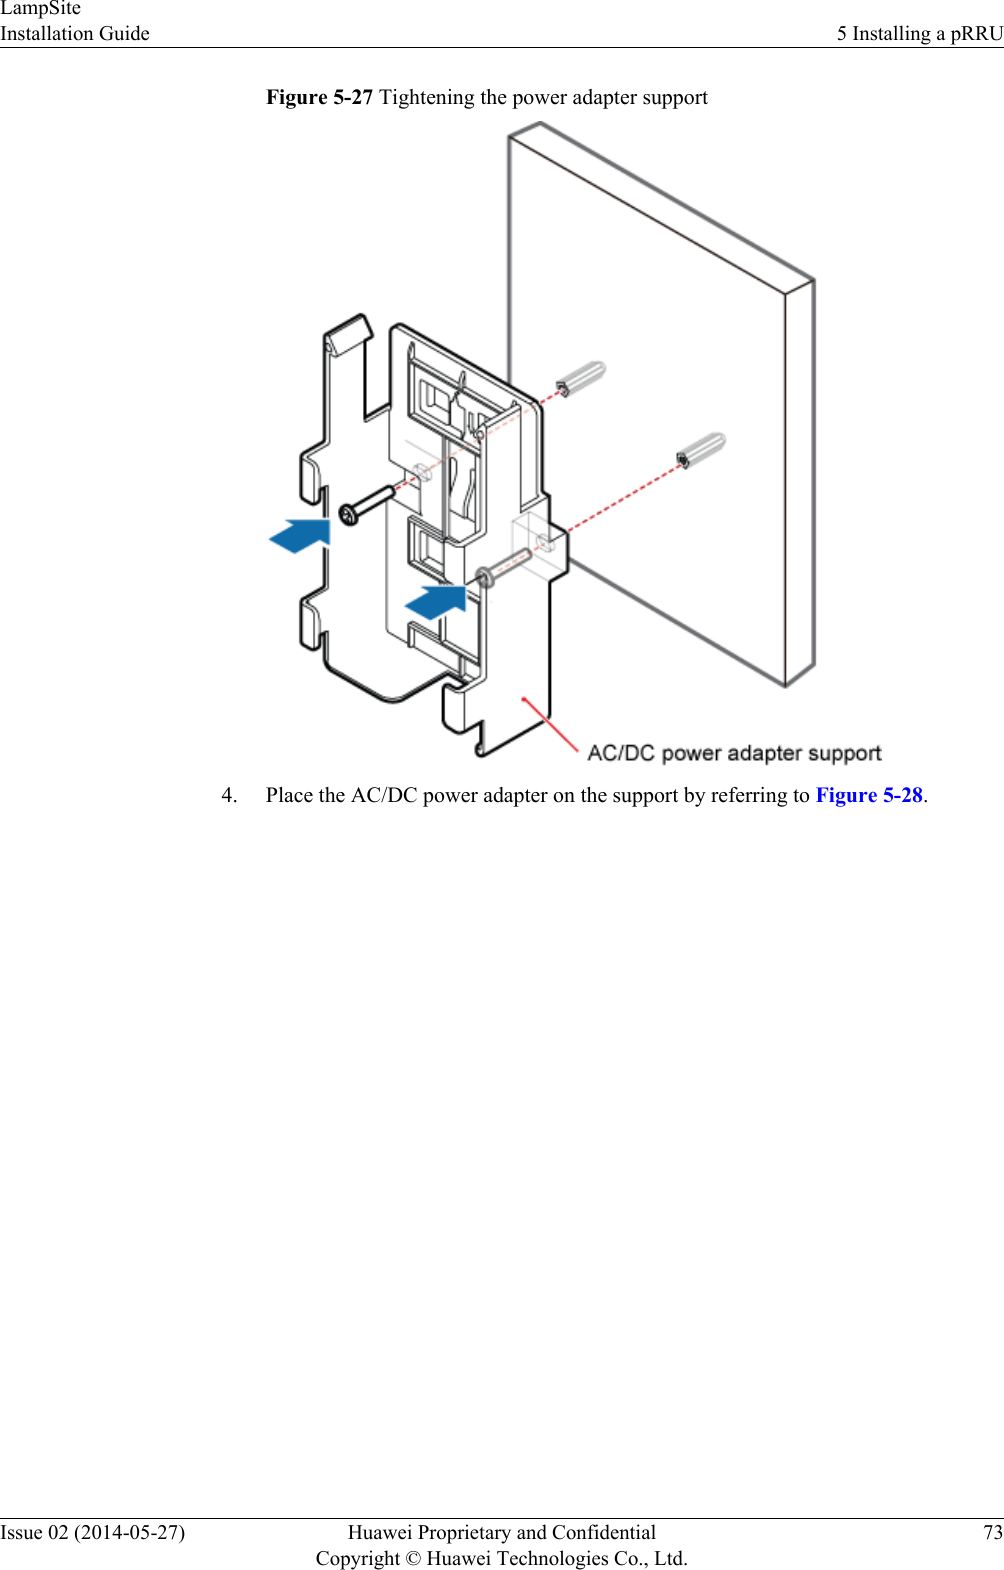 Figure 5-27 Tightening the power adapter support4. Place the AC/DC power adapter on the support by referring to Figure 5-28.LampSiteInstallation Guide 5 Installing a pRRUIssue 02 (2014-05-27) Huawei Proprietary and ConfidentialCopyright © Huawei Technologies Co., Ltd.73